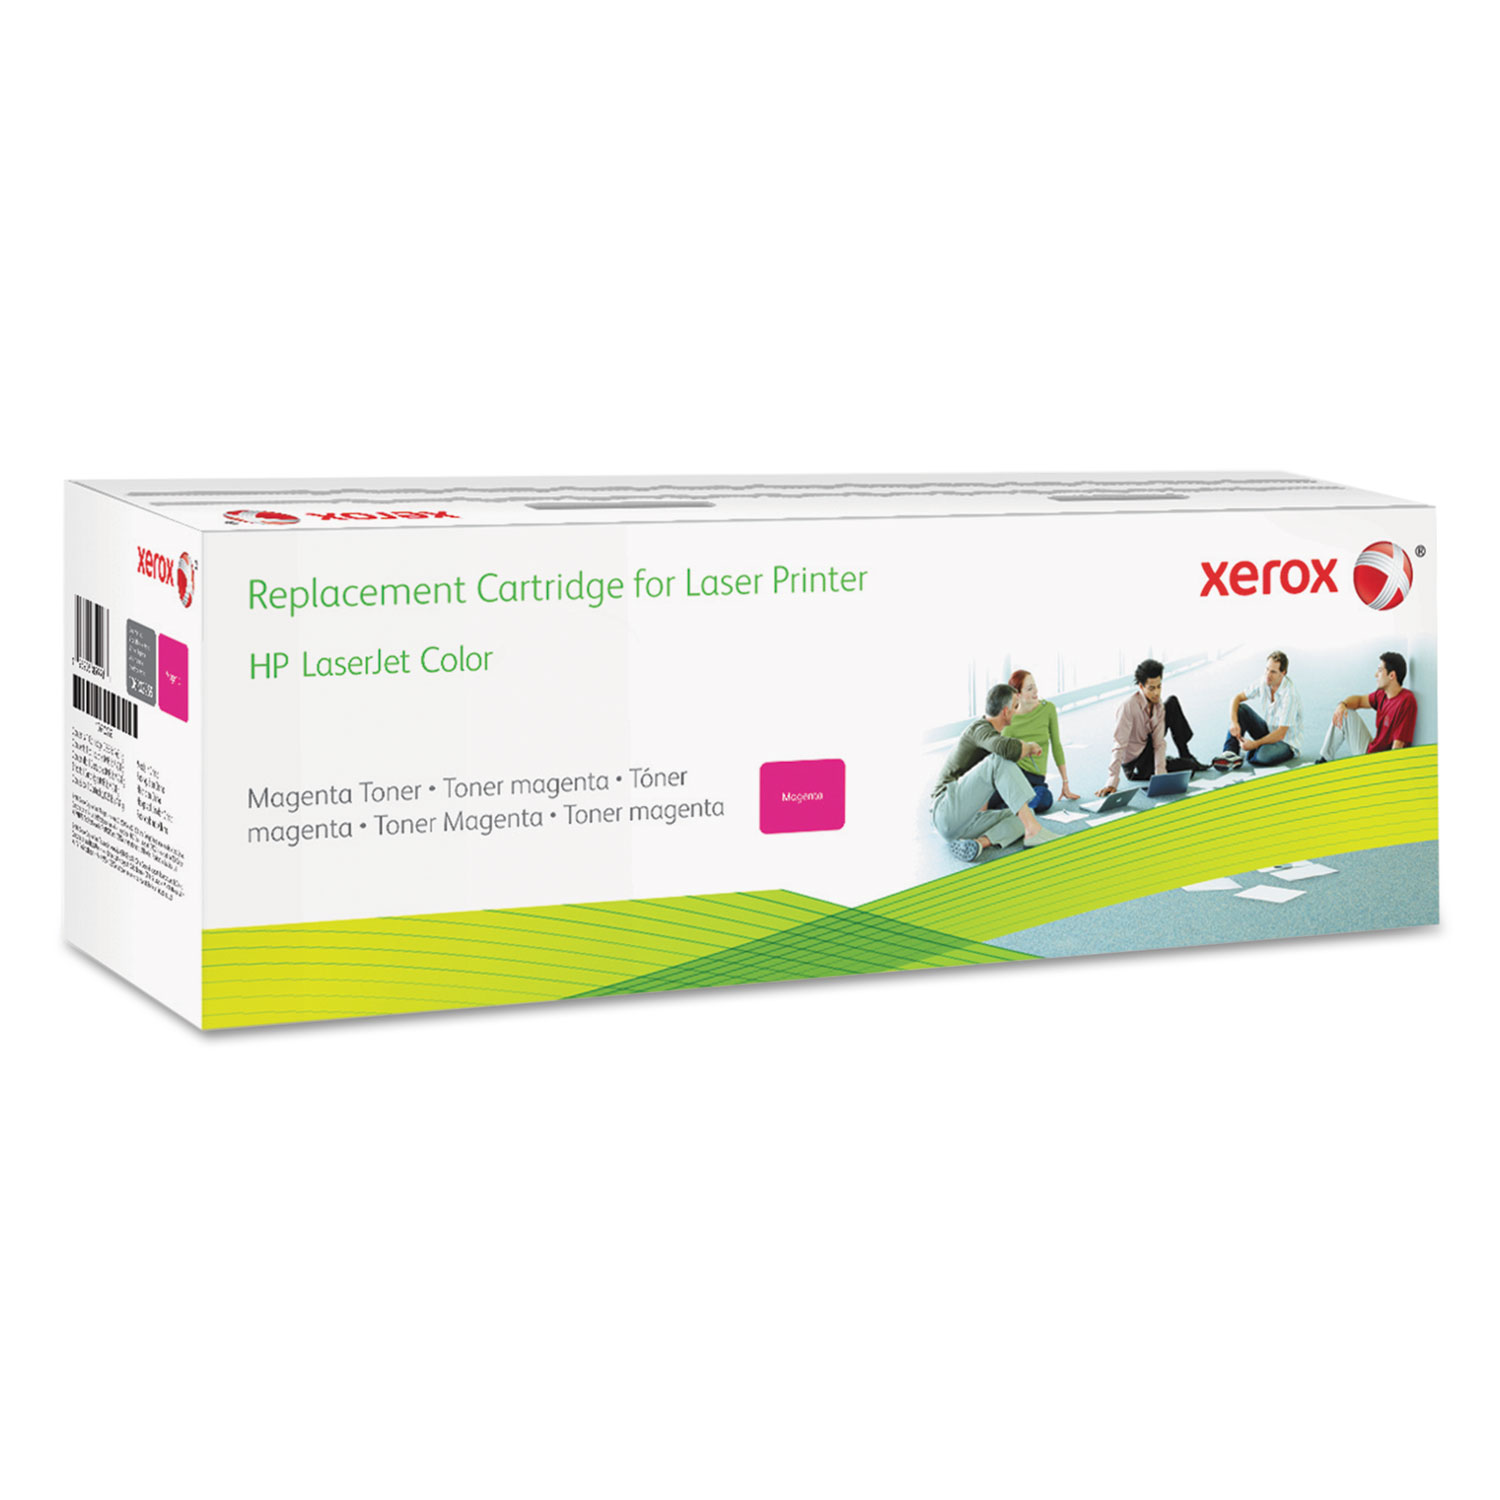  Xerox 006R03255 006R03255 Remanufactured CF383A (312A) Toner, 2800 Page-Yield, Magenta (XER006R03255) 